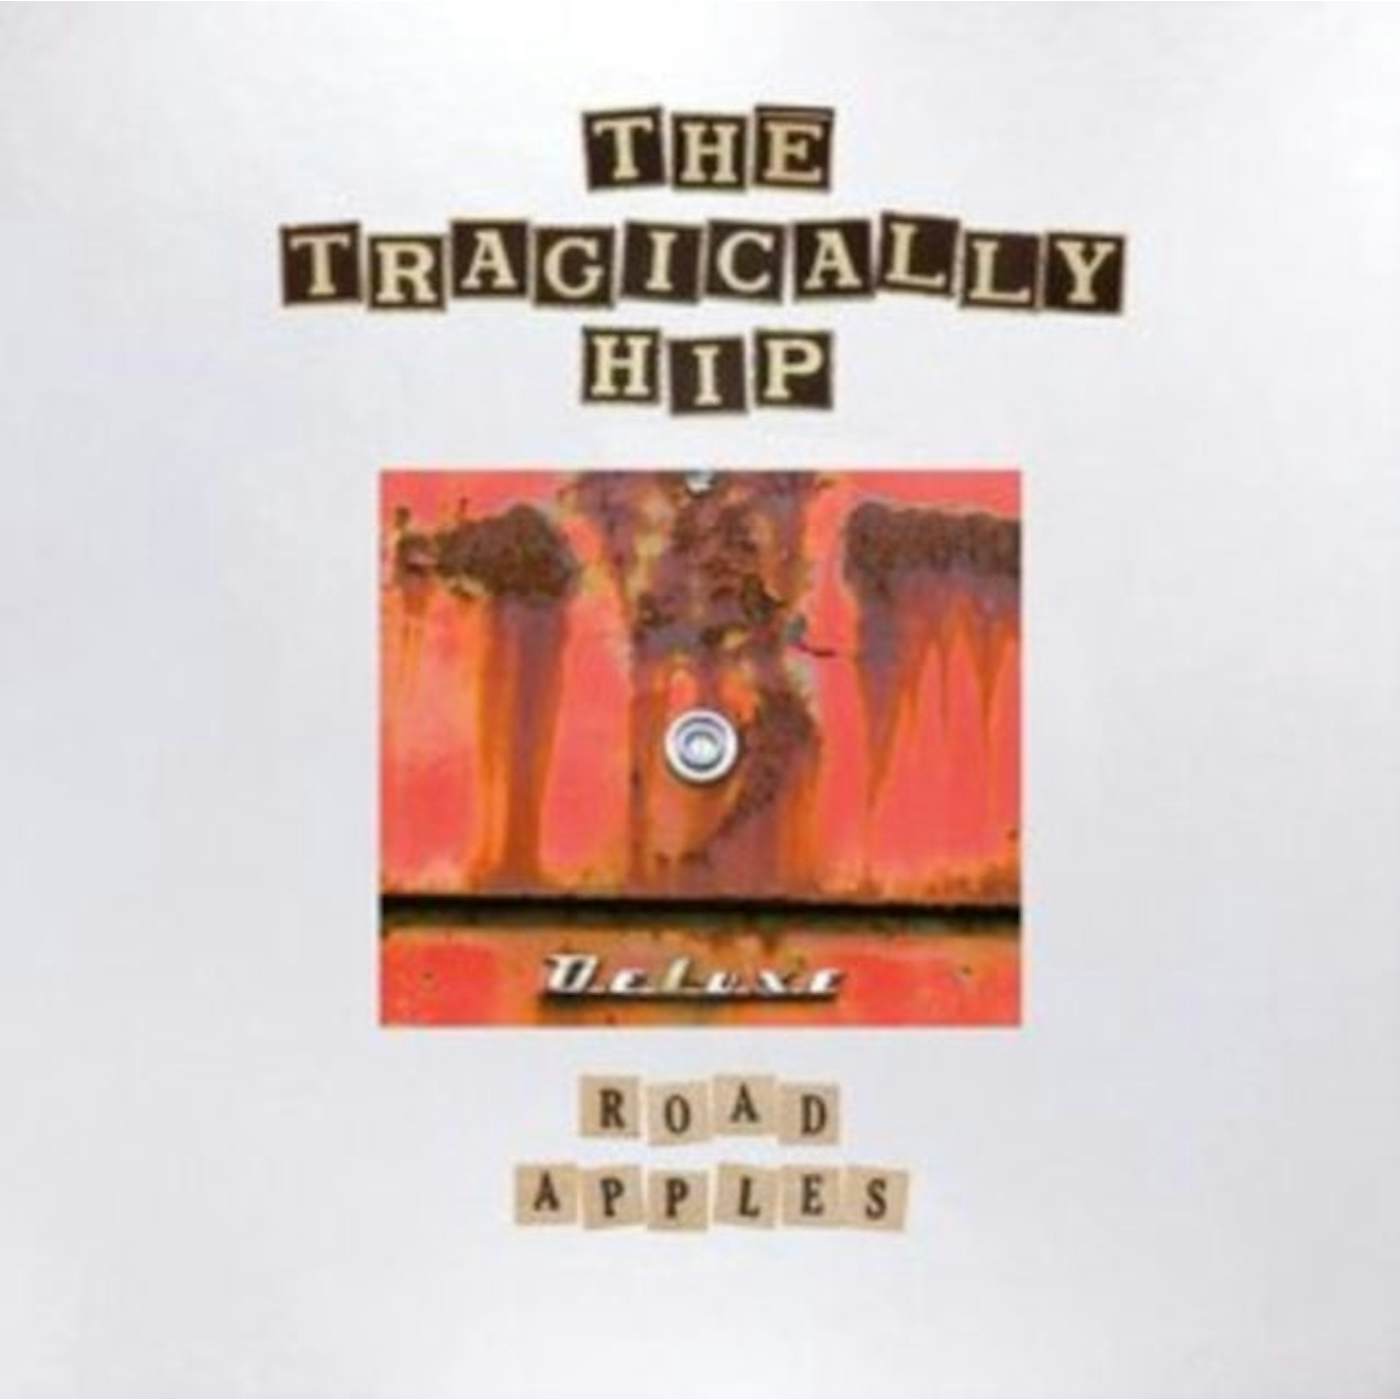 The Tragically Hip LP Vinyl Record - Road Apples - 30th Anniversary (Deluxe Edition)